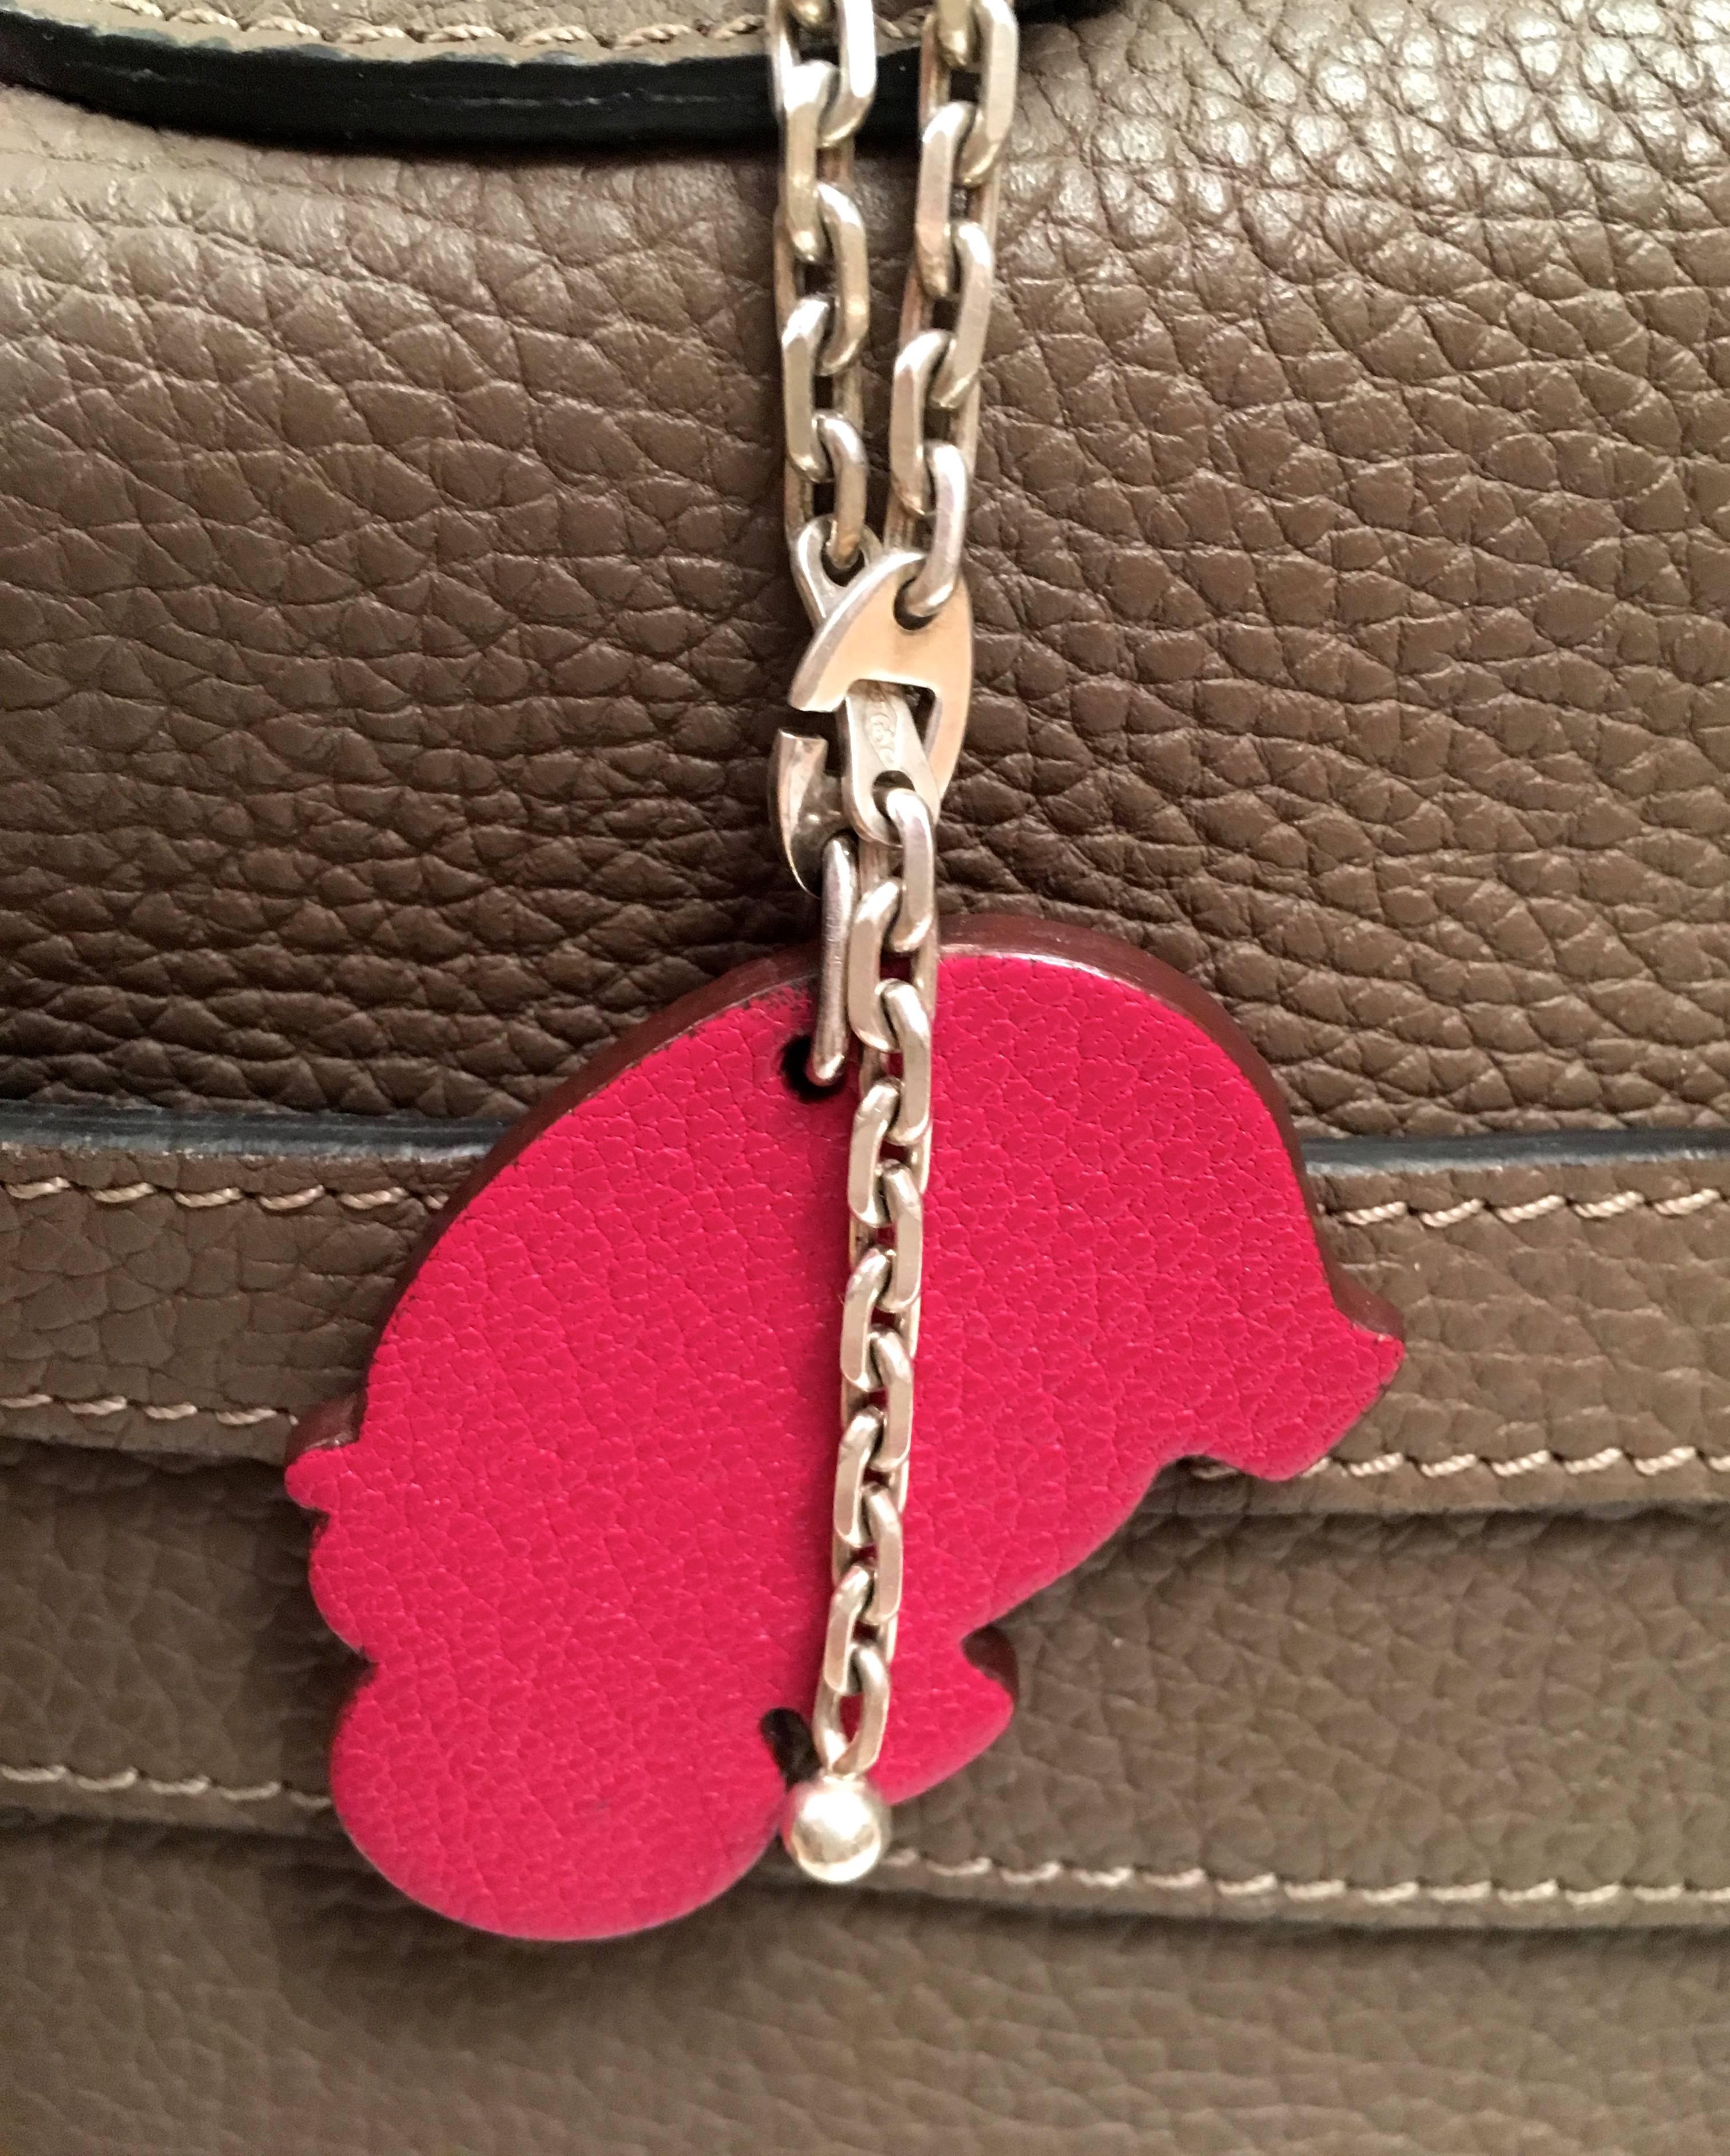 Presented here is a beautiful bag charm from Hermes Paris. This beautiful charm is a hippopotamus shape cut of leather with orange on one side and a magenta on the reverse side. There is a chain that is connected to the charm that is made of .925